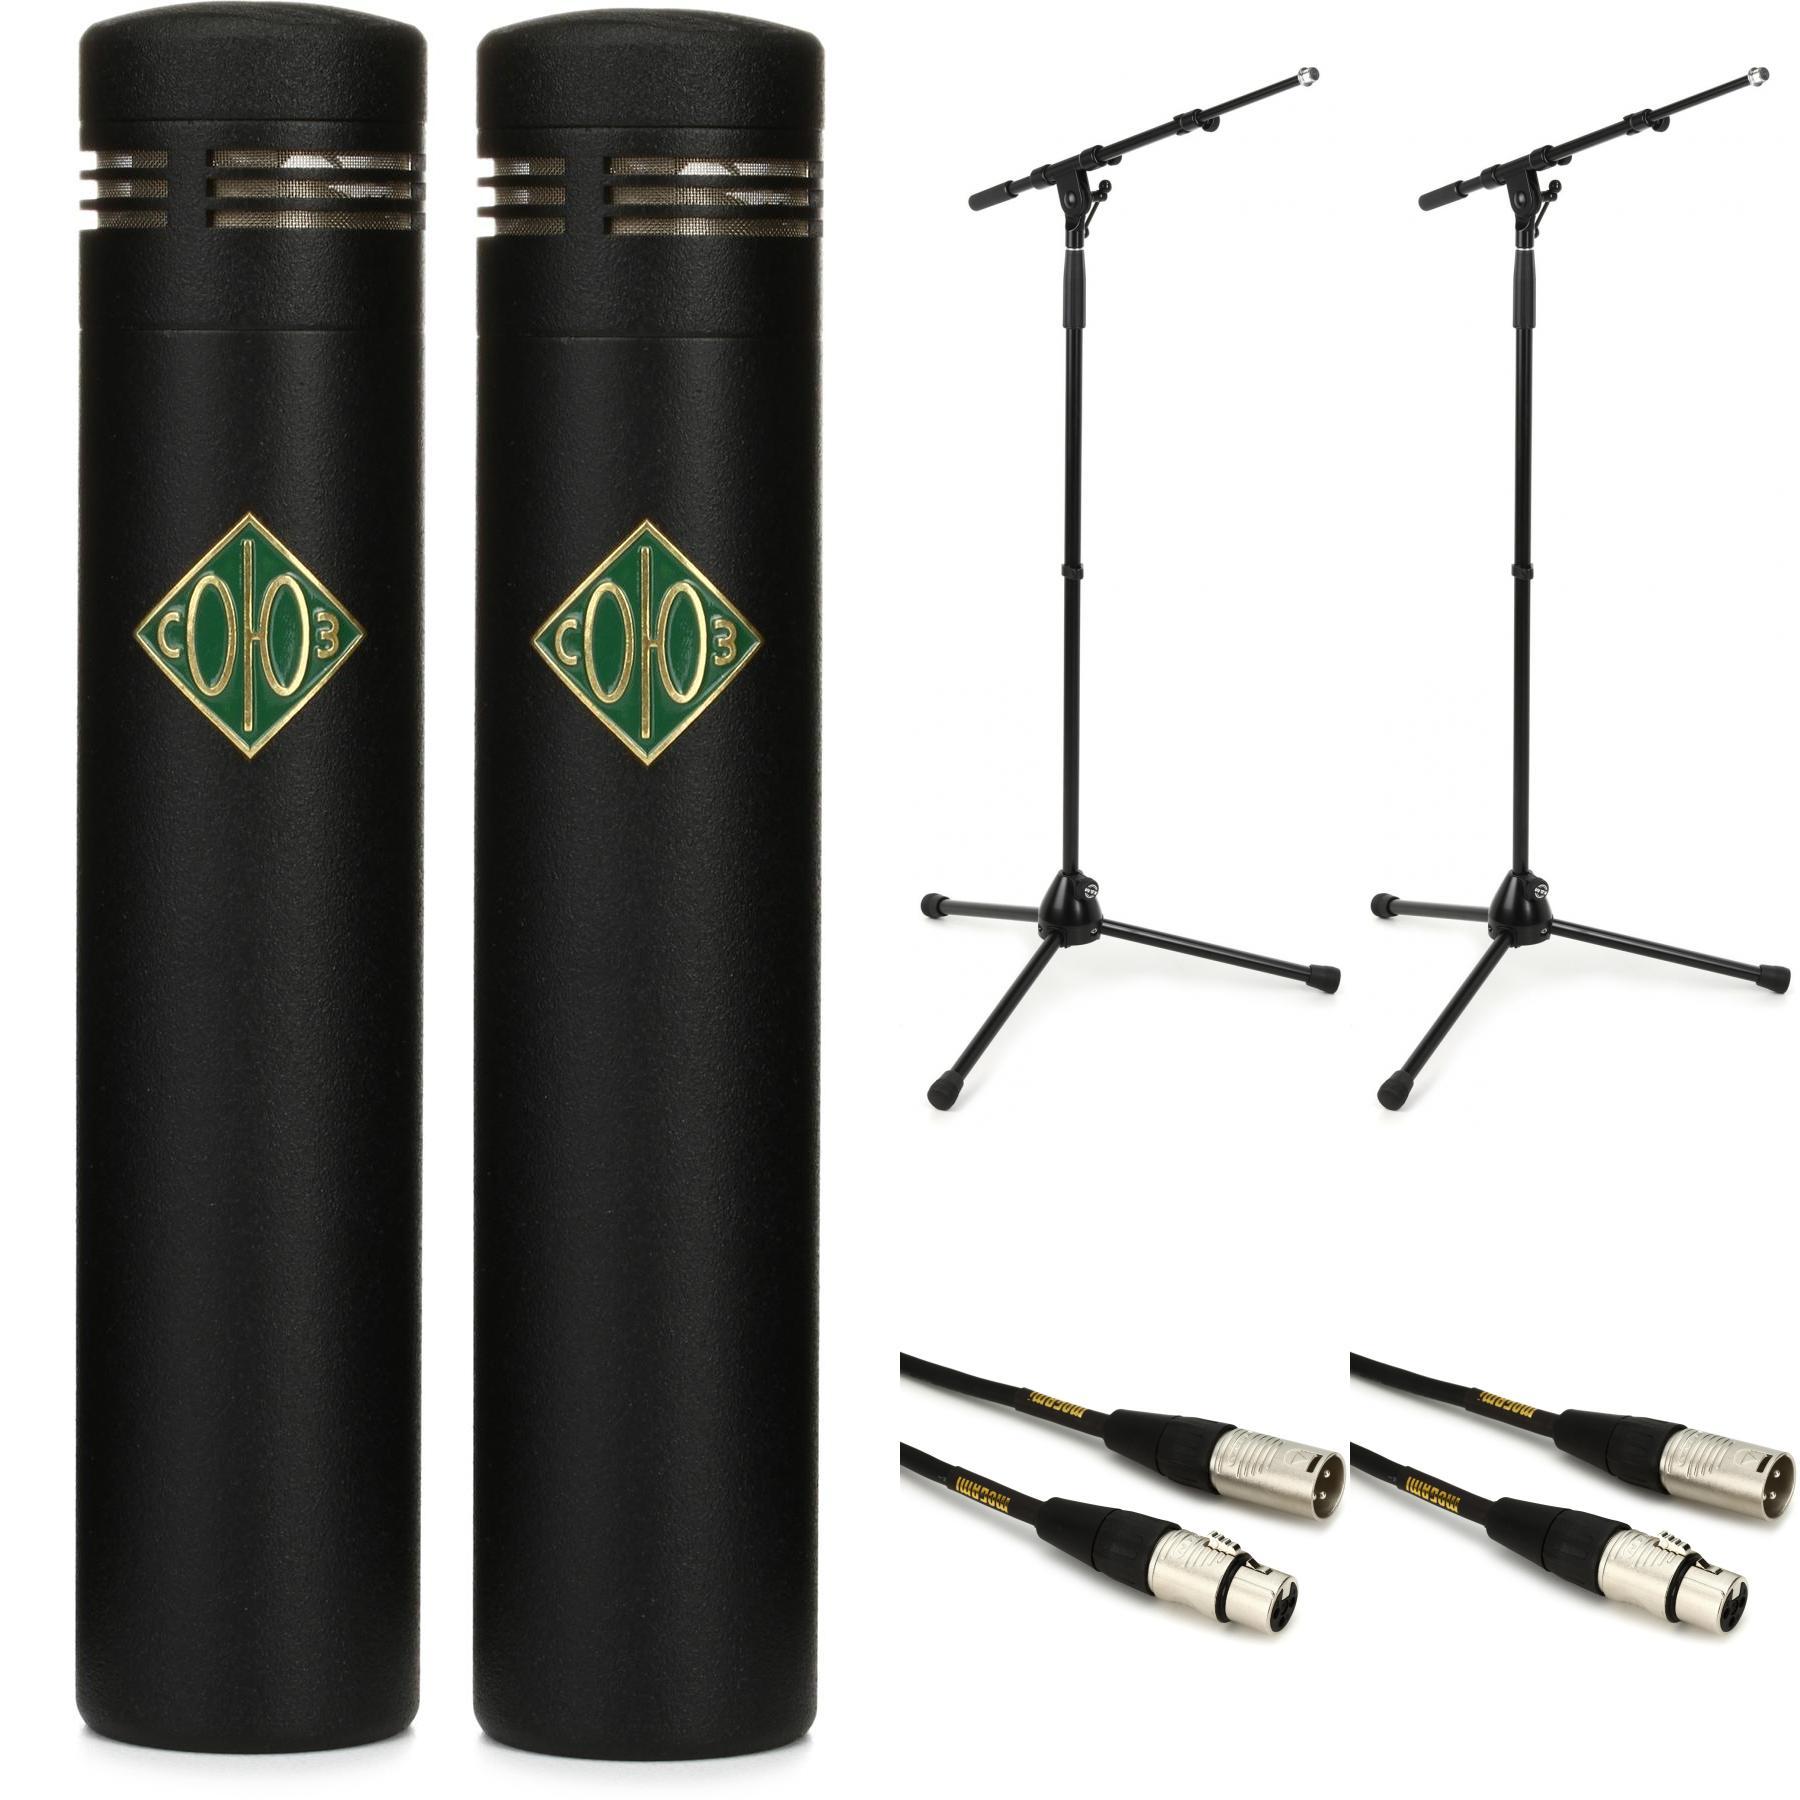 Soyuz 013 FET Small-diaphragm Multi-pattern Condenser Microphone Bundle with Stands and Cables (Stereo Pair - Black)